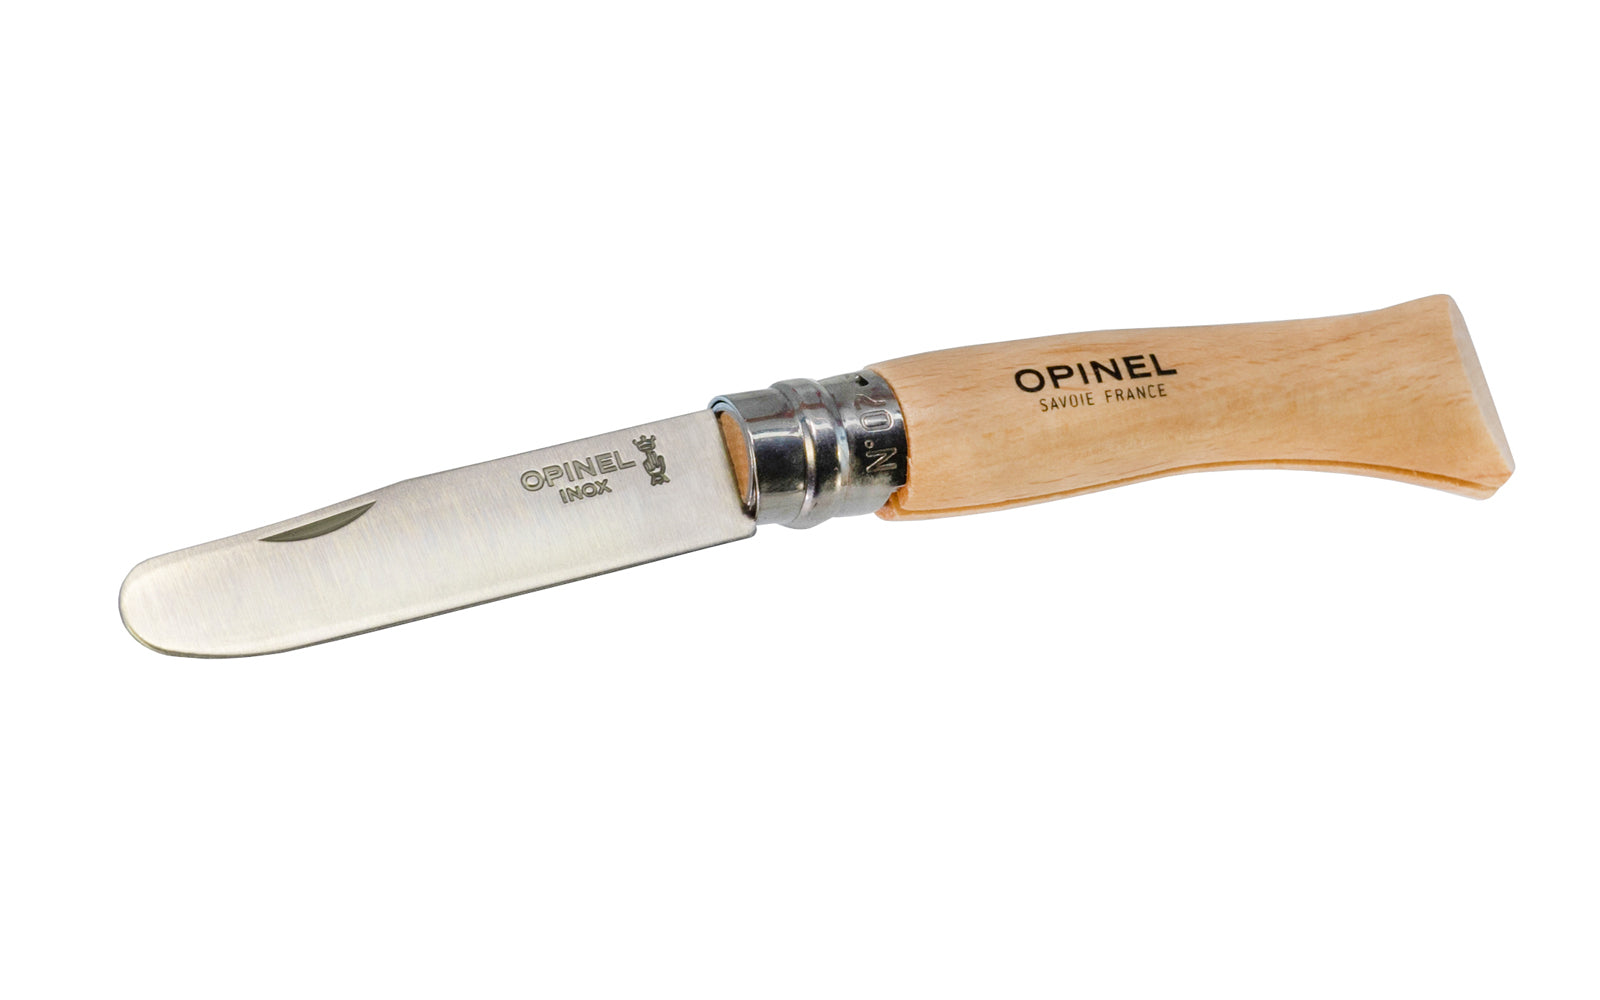 "My First Opinel" "Mon premier Opinel" with Sheath is the perfect knife to teach kids how to whittle, cut, prune or carve wood. The stainless steel blade is very versatile & great for everyday use. Stainless steel knife with blunt end for children. Model 002400. Blunt blade opinel folding knife ~ Made in France